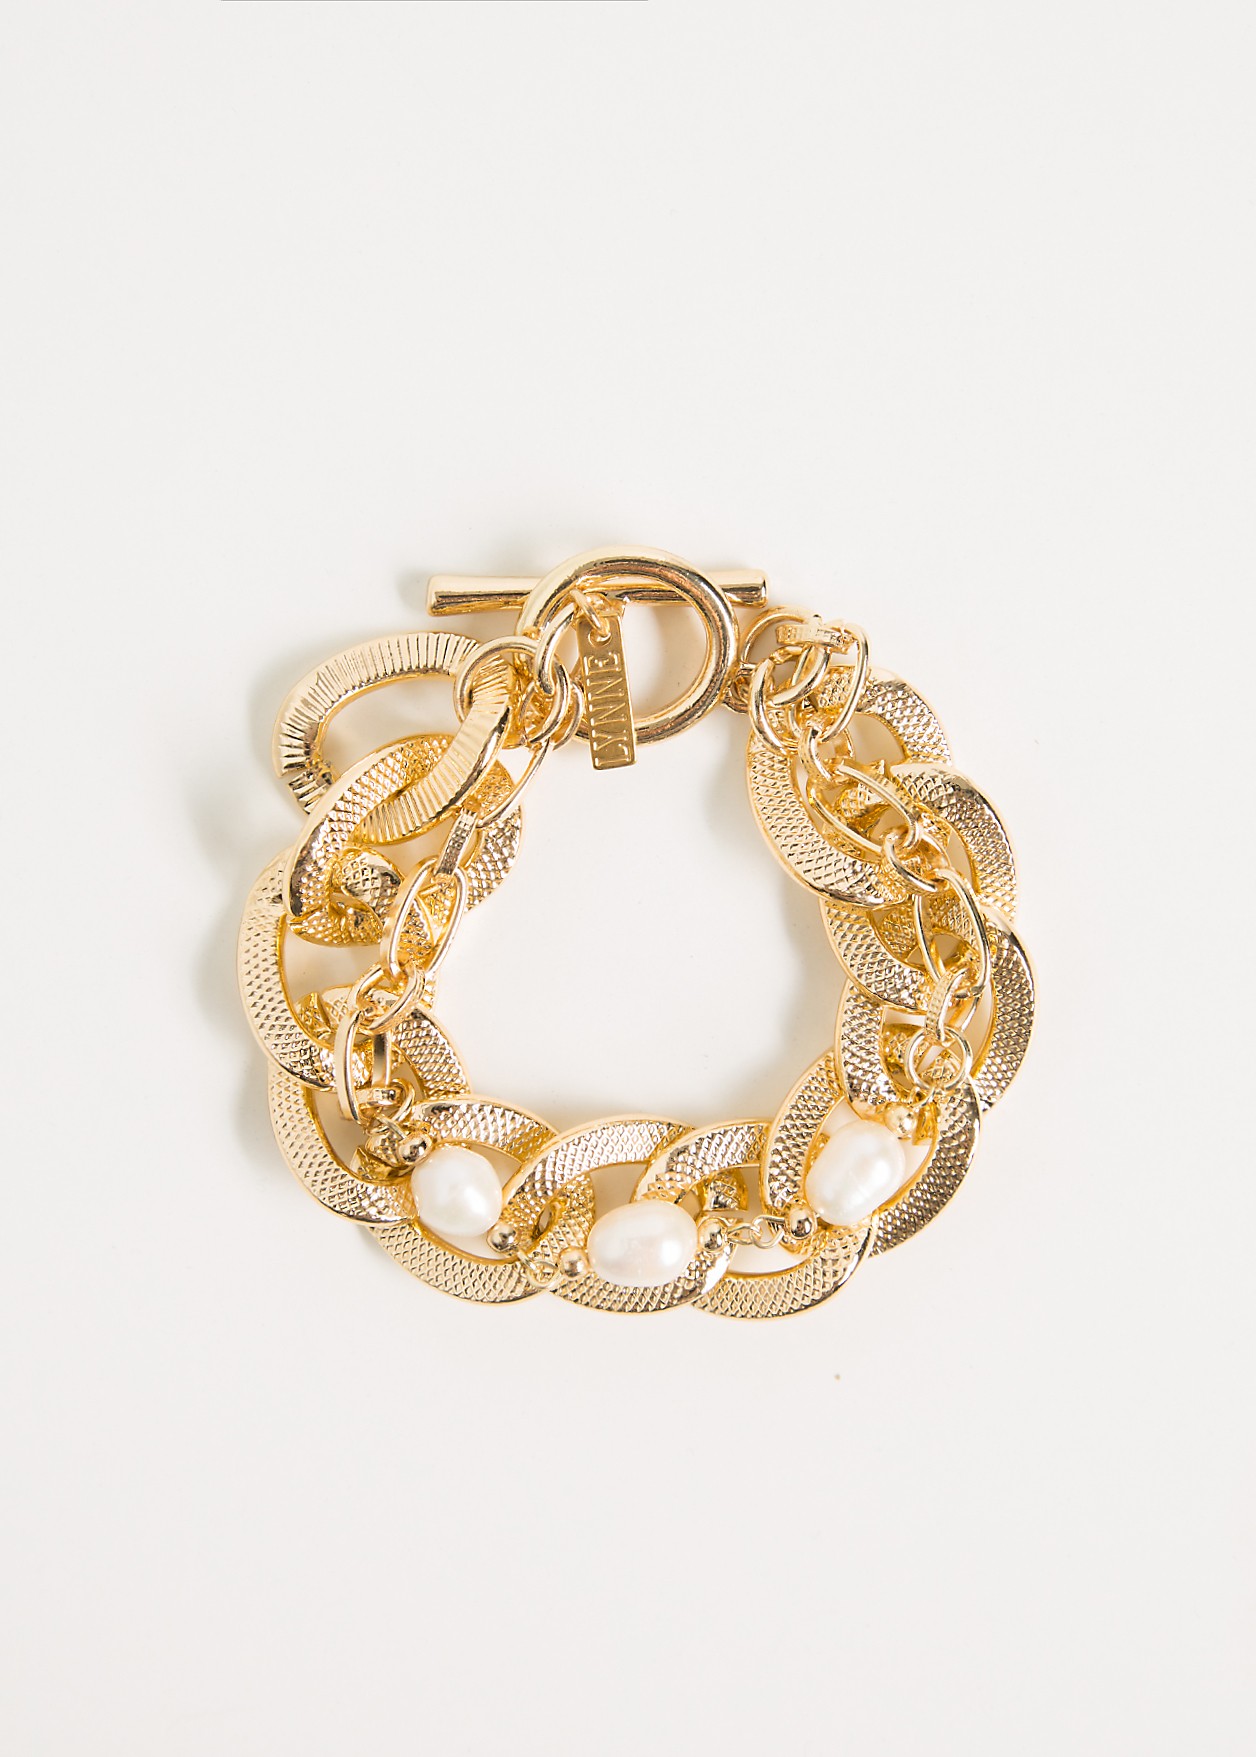 Chain bracelet with pearl details